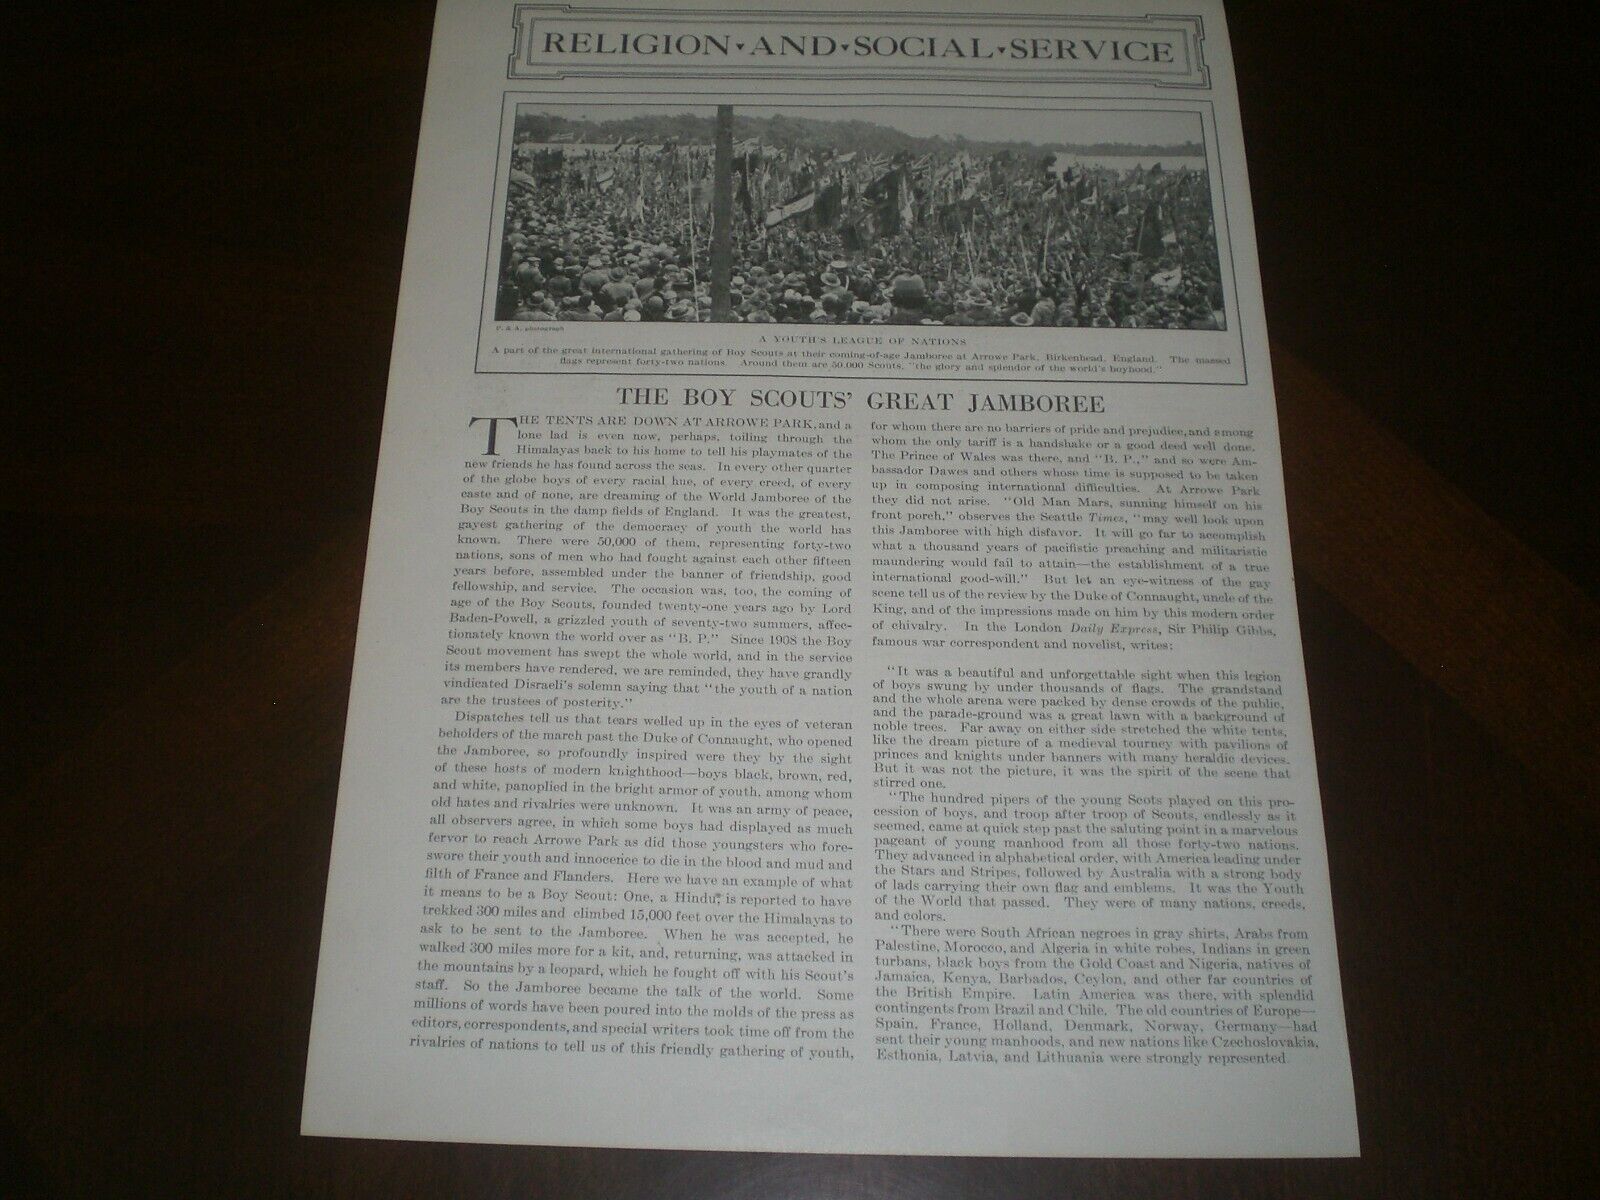 Boy Scouts' Great Jamboree of 1929 (Article in Literary Digest August 31, 1929)